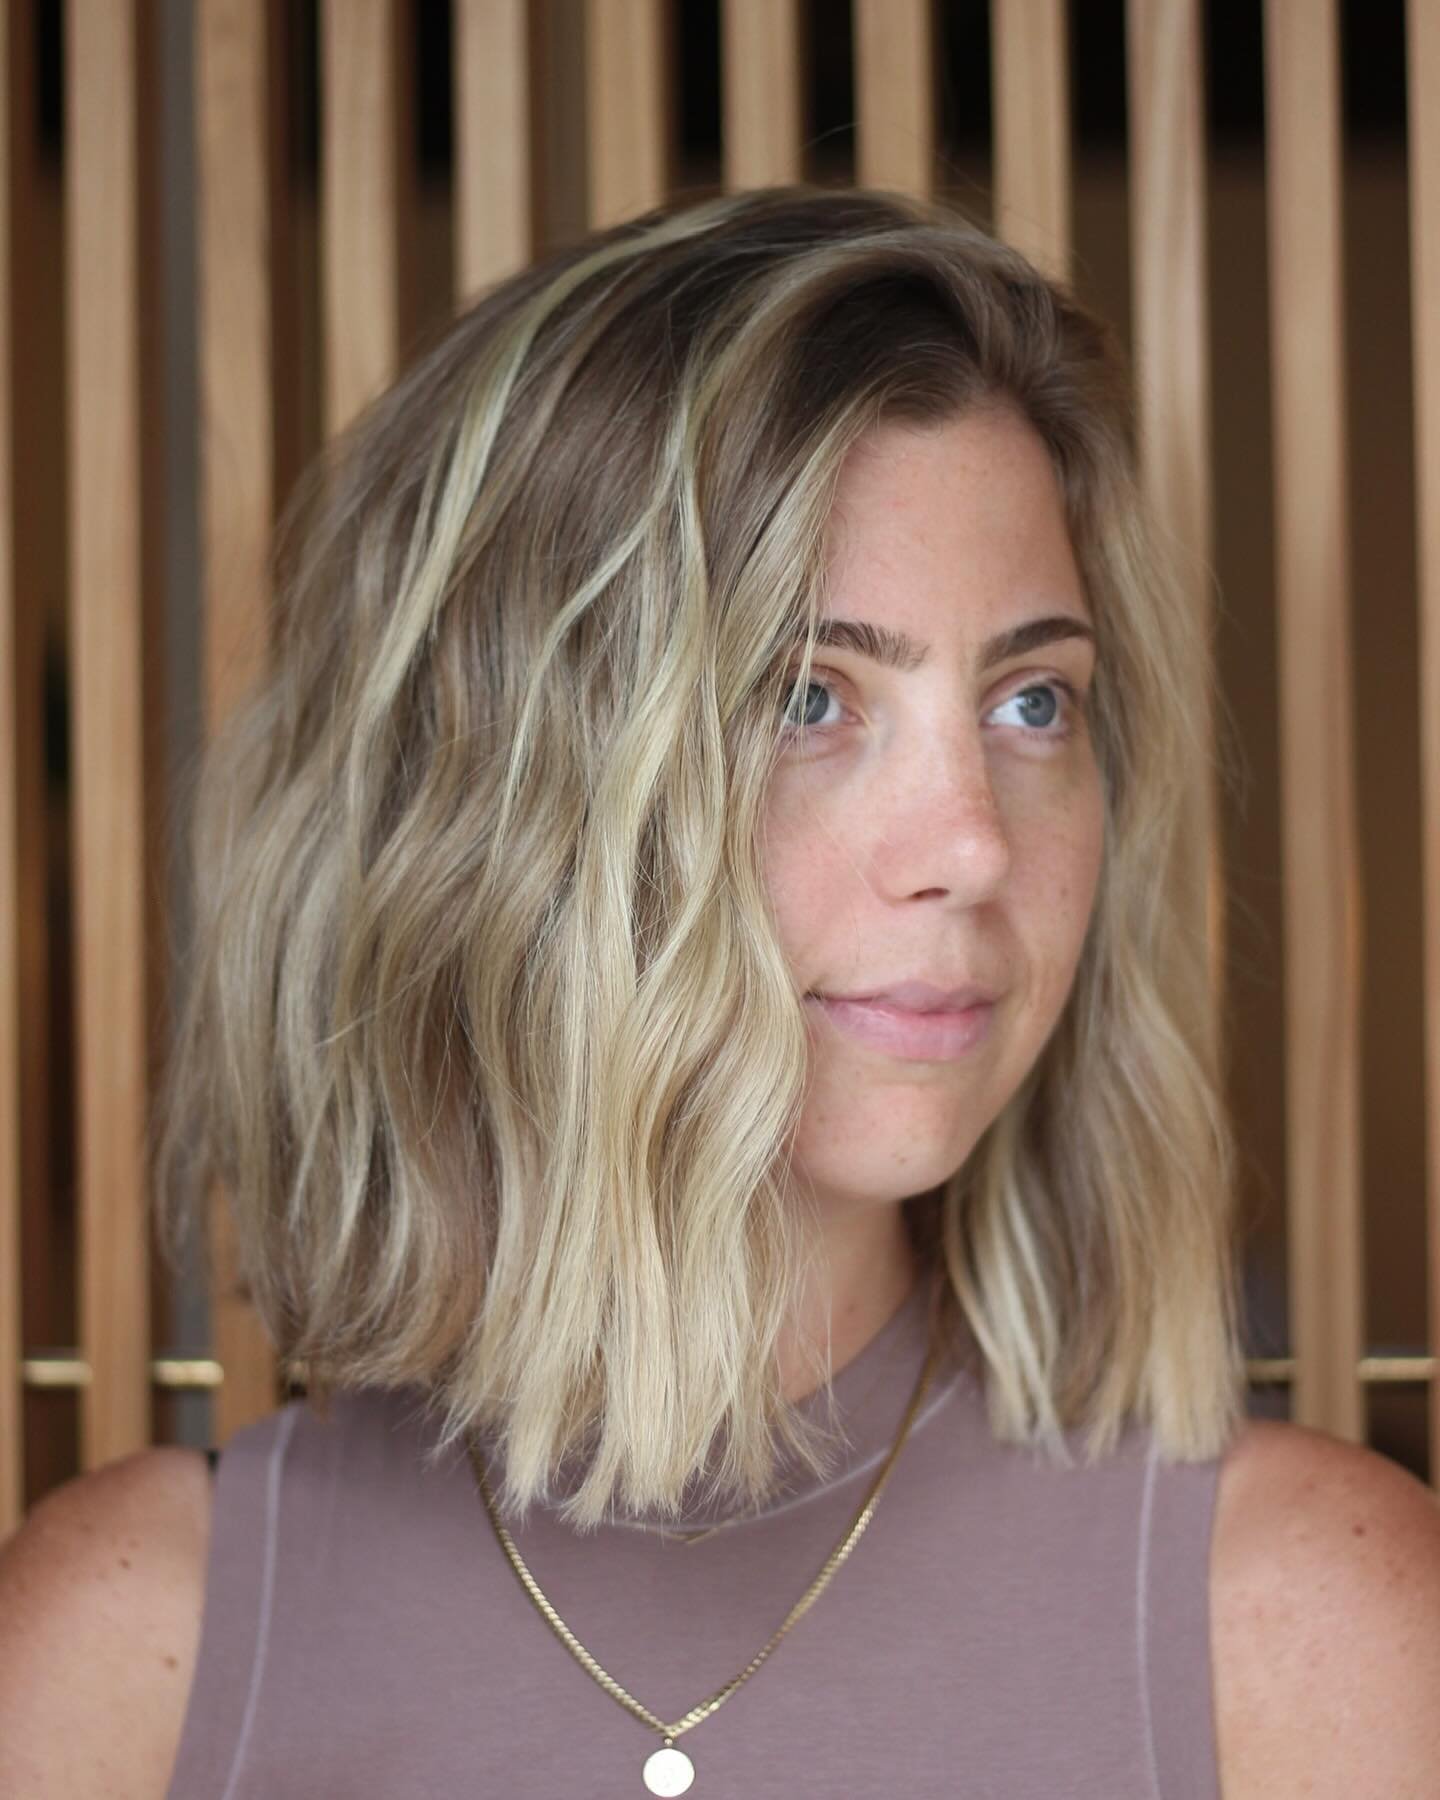 Summer is all about easy-breezy style, and our highlighting services can align perfectly with that.

Opting for a balayage or babylights, which grow out more seamlessly and require fewer touch-ups compared to traditional foil highlights, are the perf